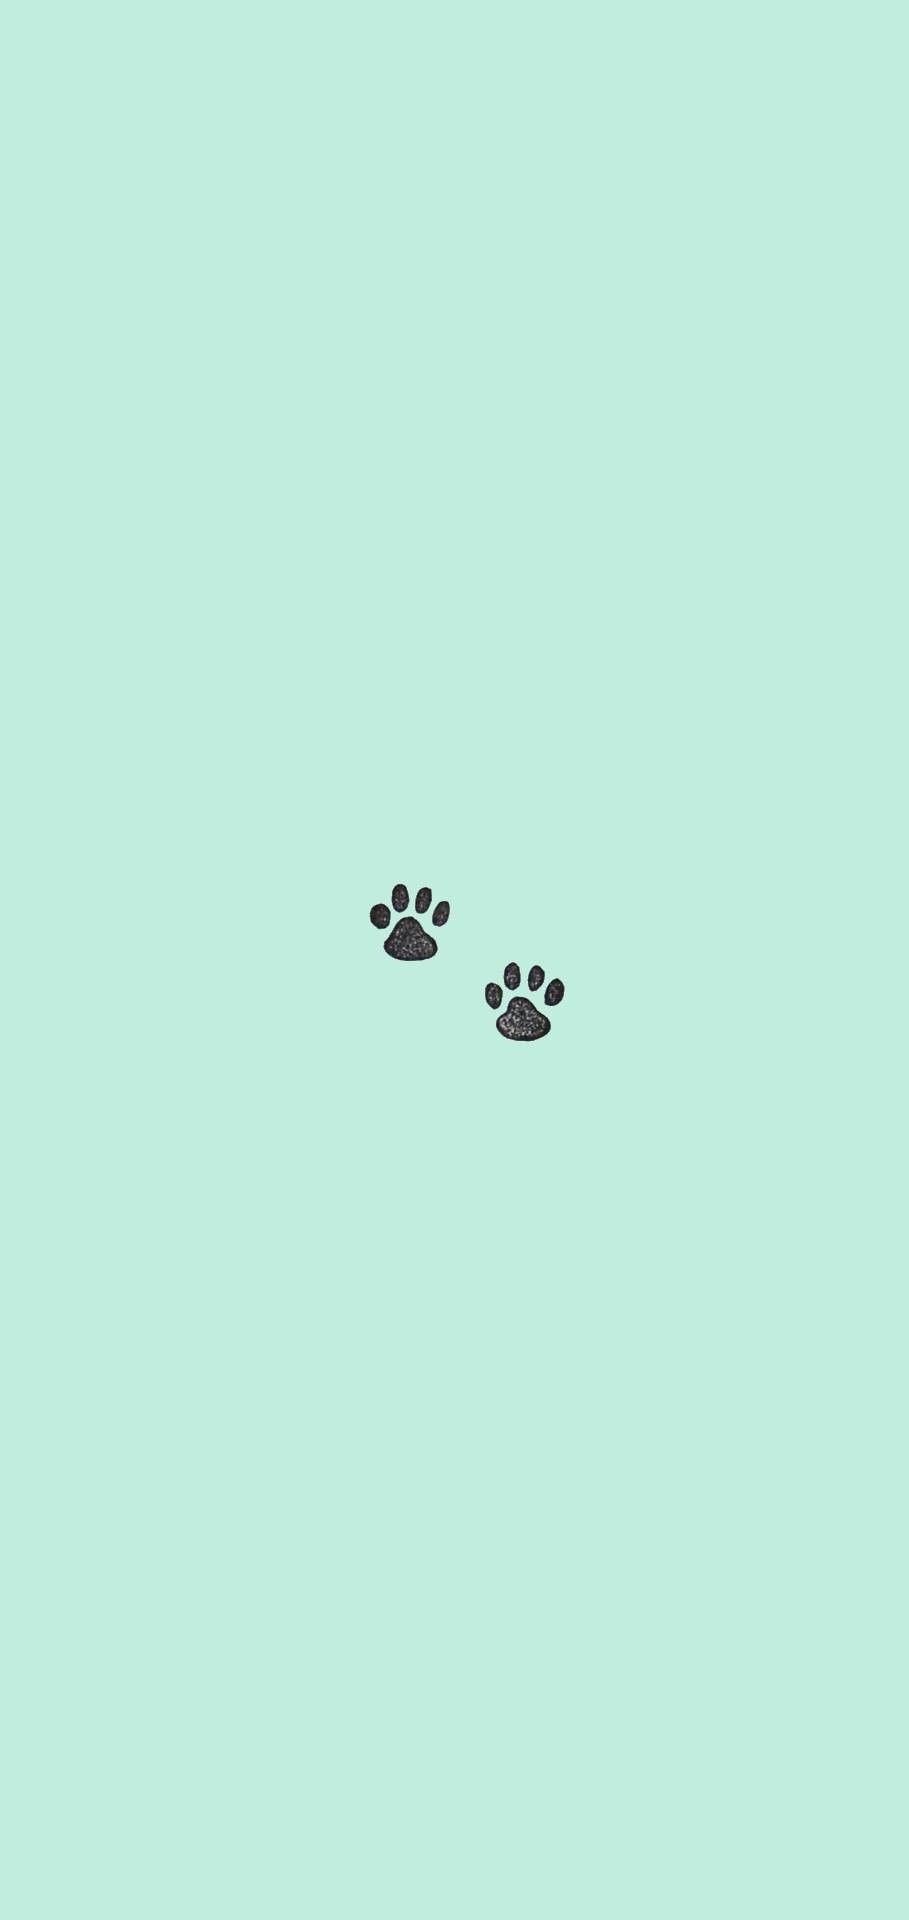 Minimalist wallpaper with a pair of paw prints - Turquoise